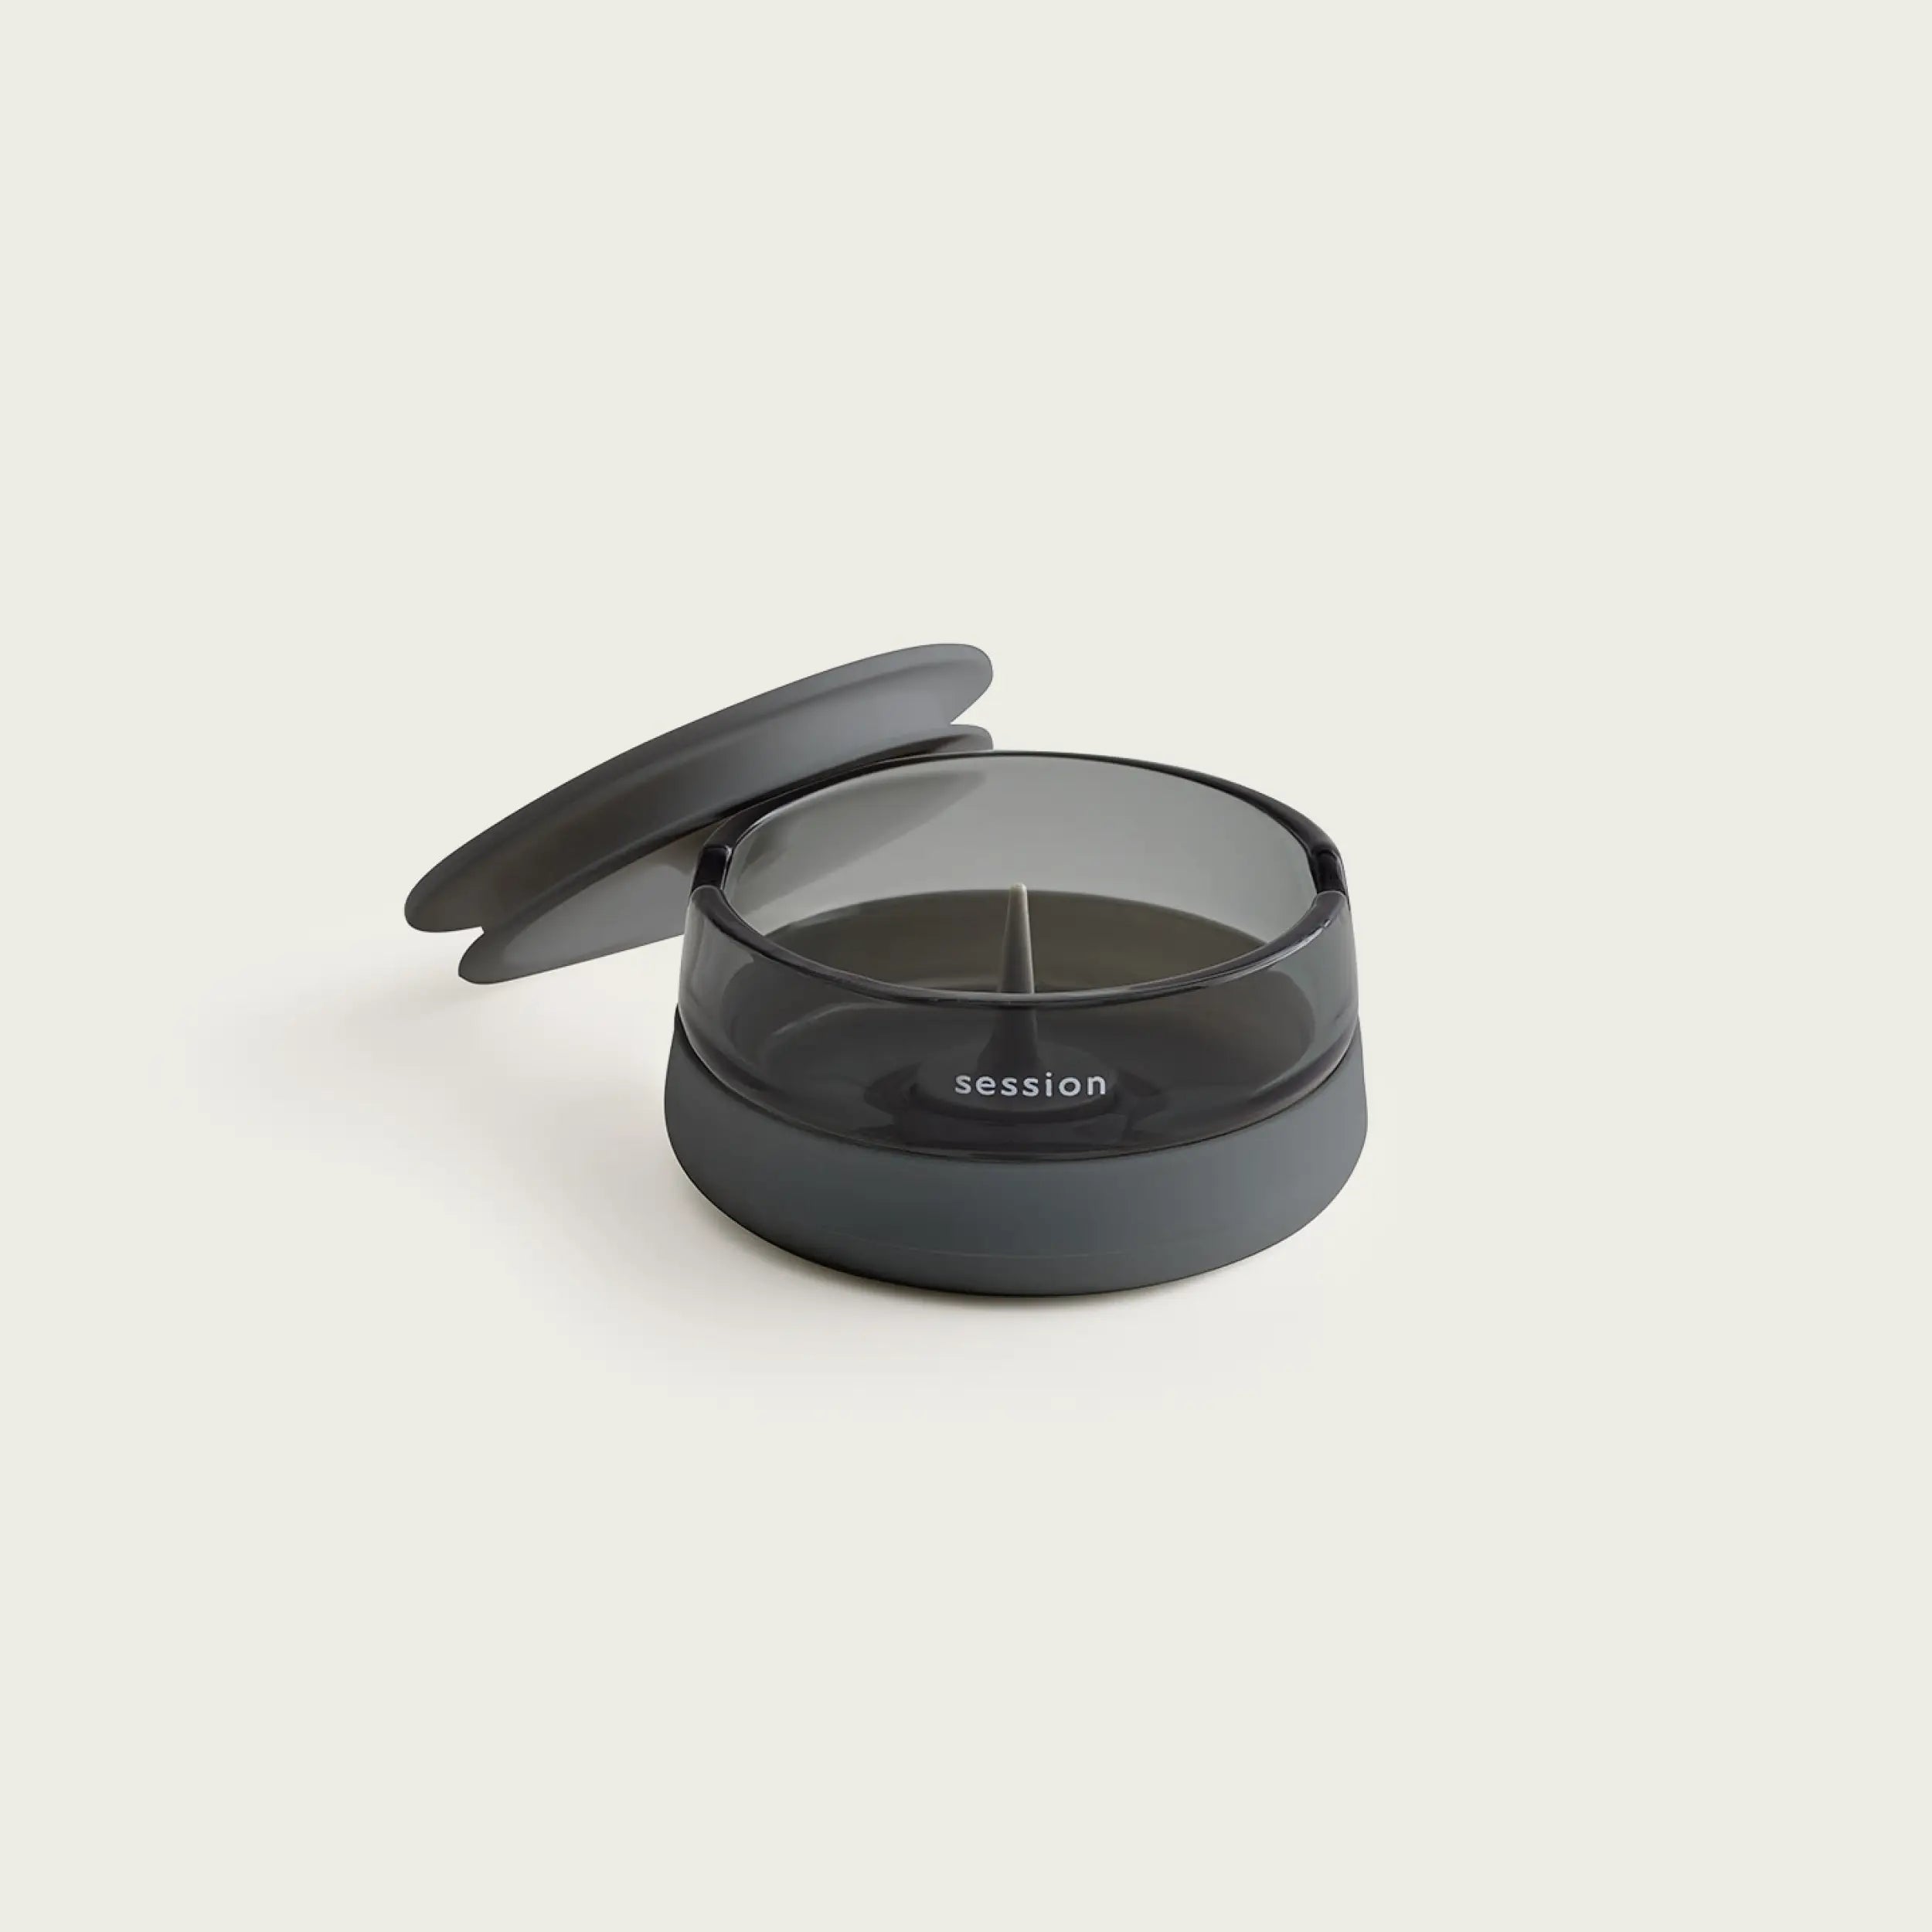 Session Goods Home Ashtray: A Stylish Addition to Your Smoking Space.